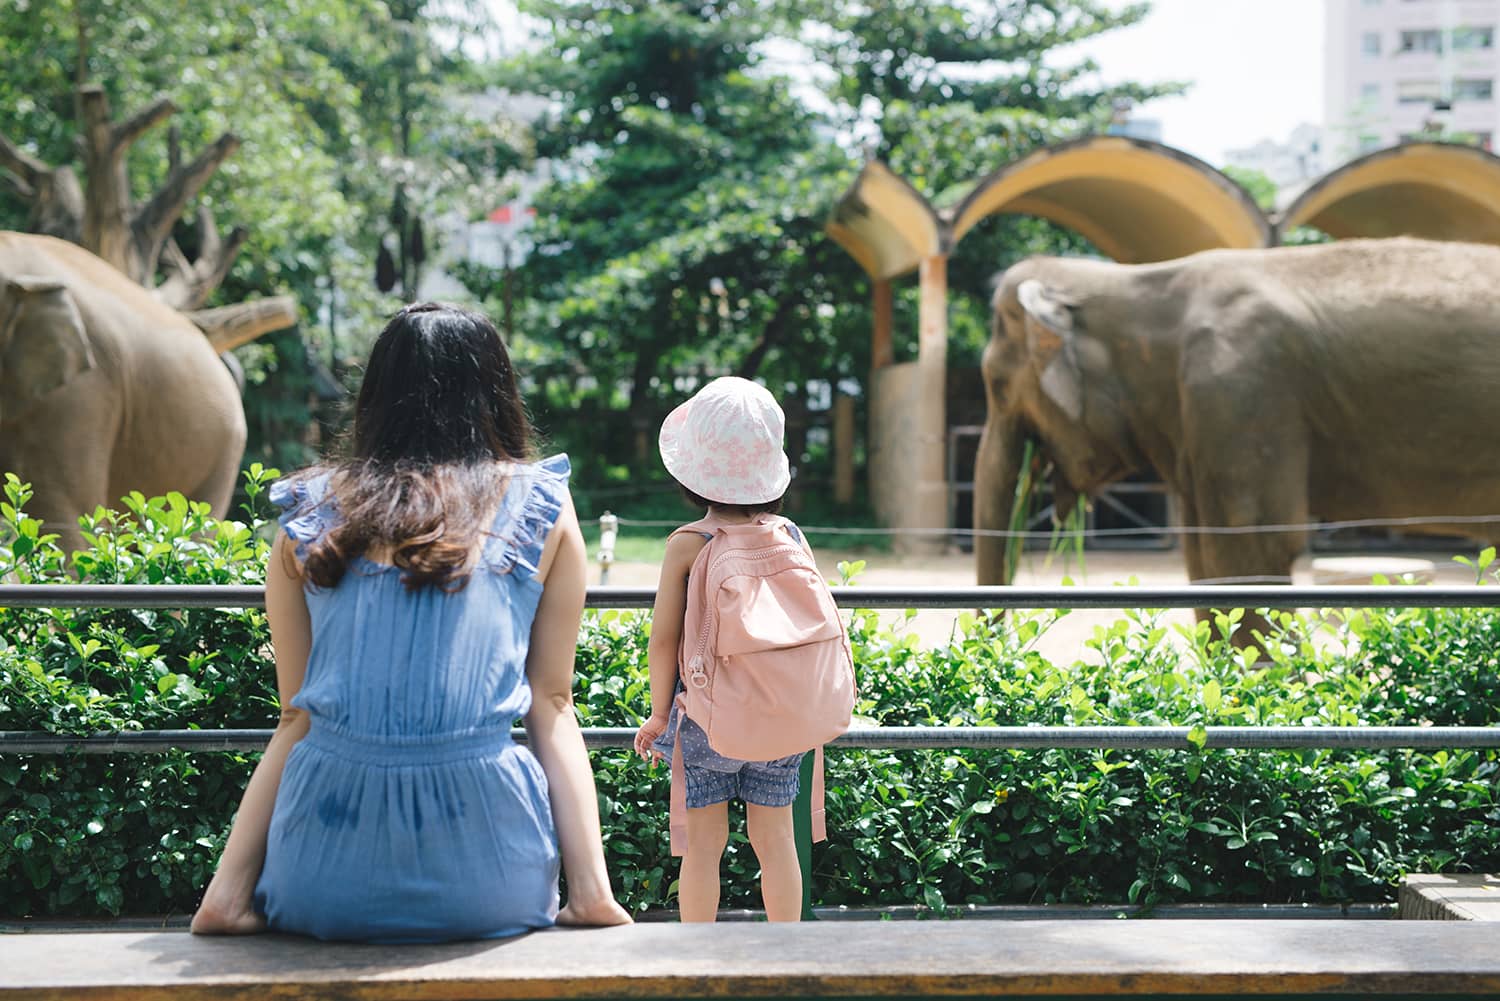 happy-mother-and-daughter-watching-and-feeding-elephants-in-zoo